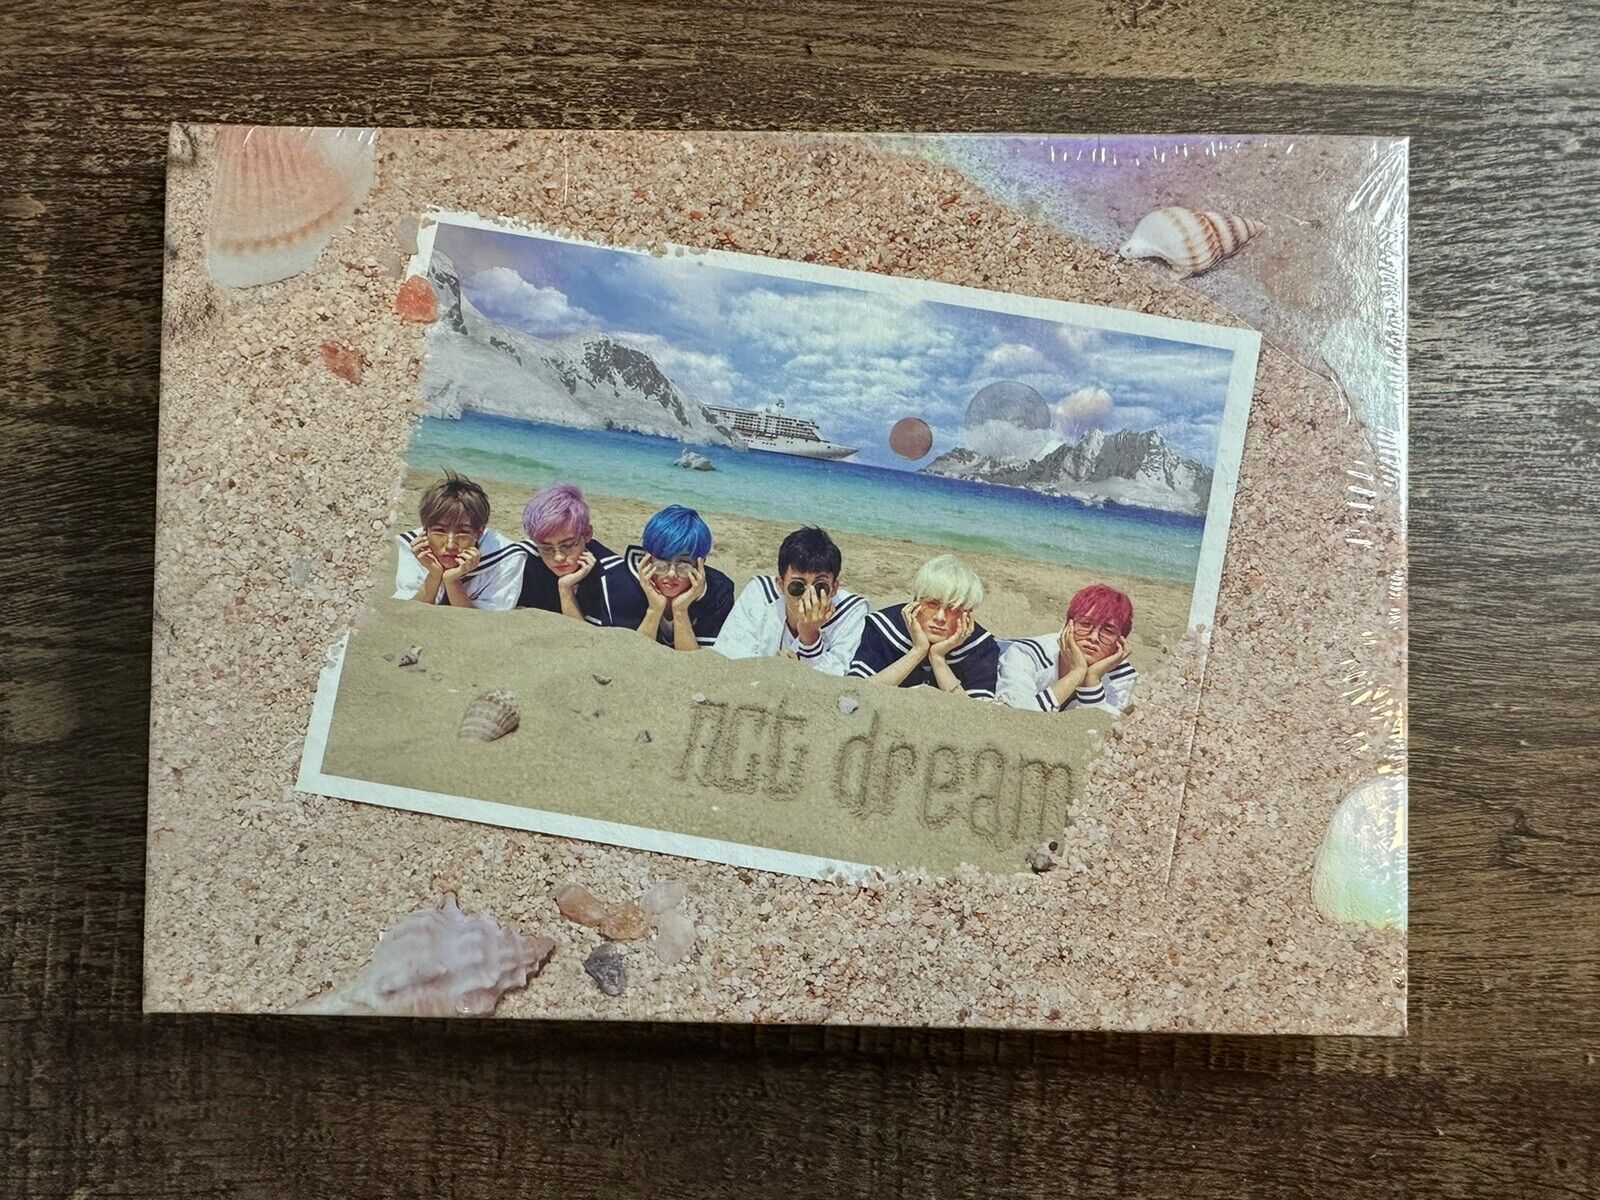 K-POP NCT DREAM 1st Mini Album [We Young] CD+72p Booklet+Photocard US SELLER